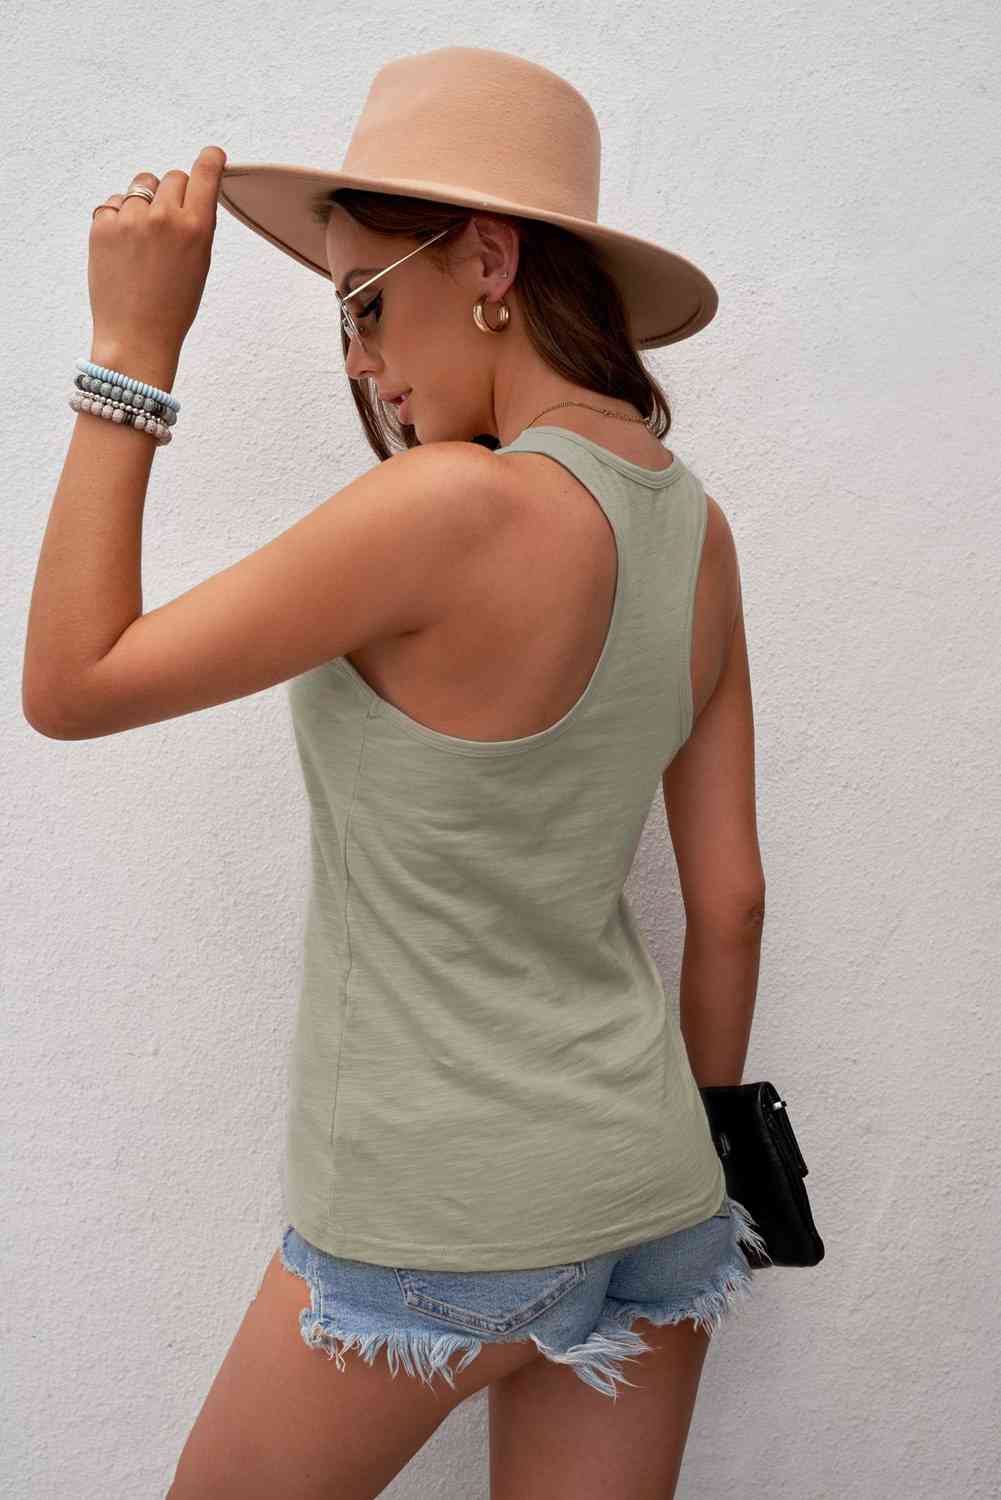 a woman wearing a hat and a tank top